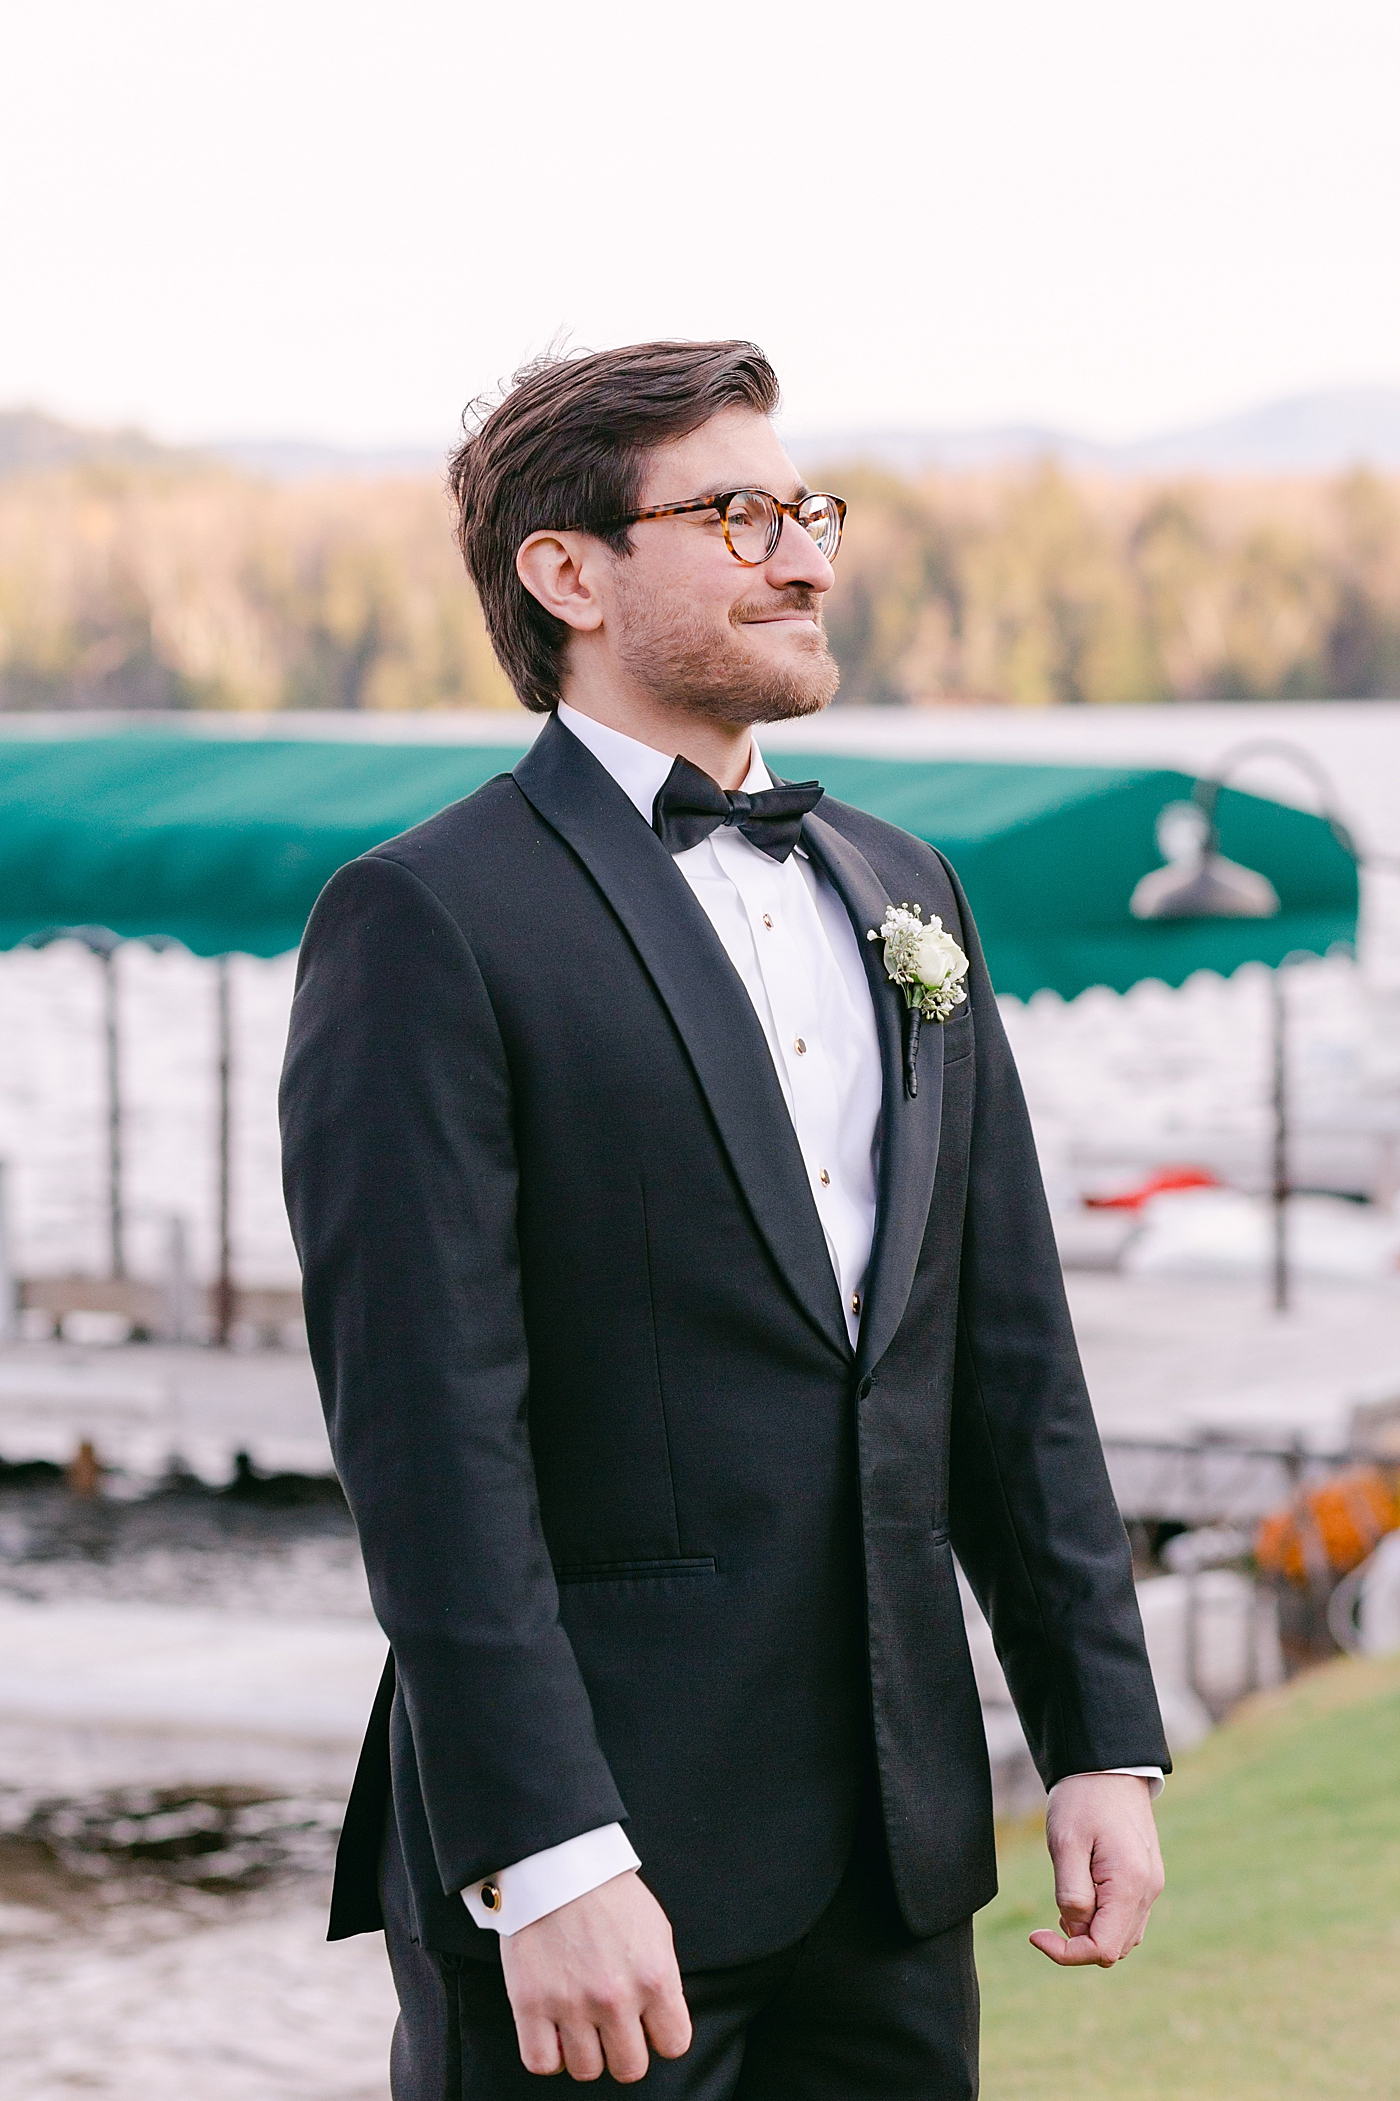 Groom watching bride walk down the aisle | Image by Hope Helmuth Photography